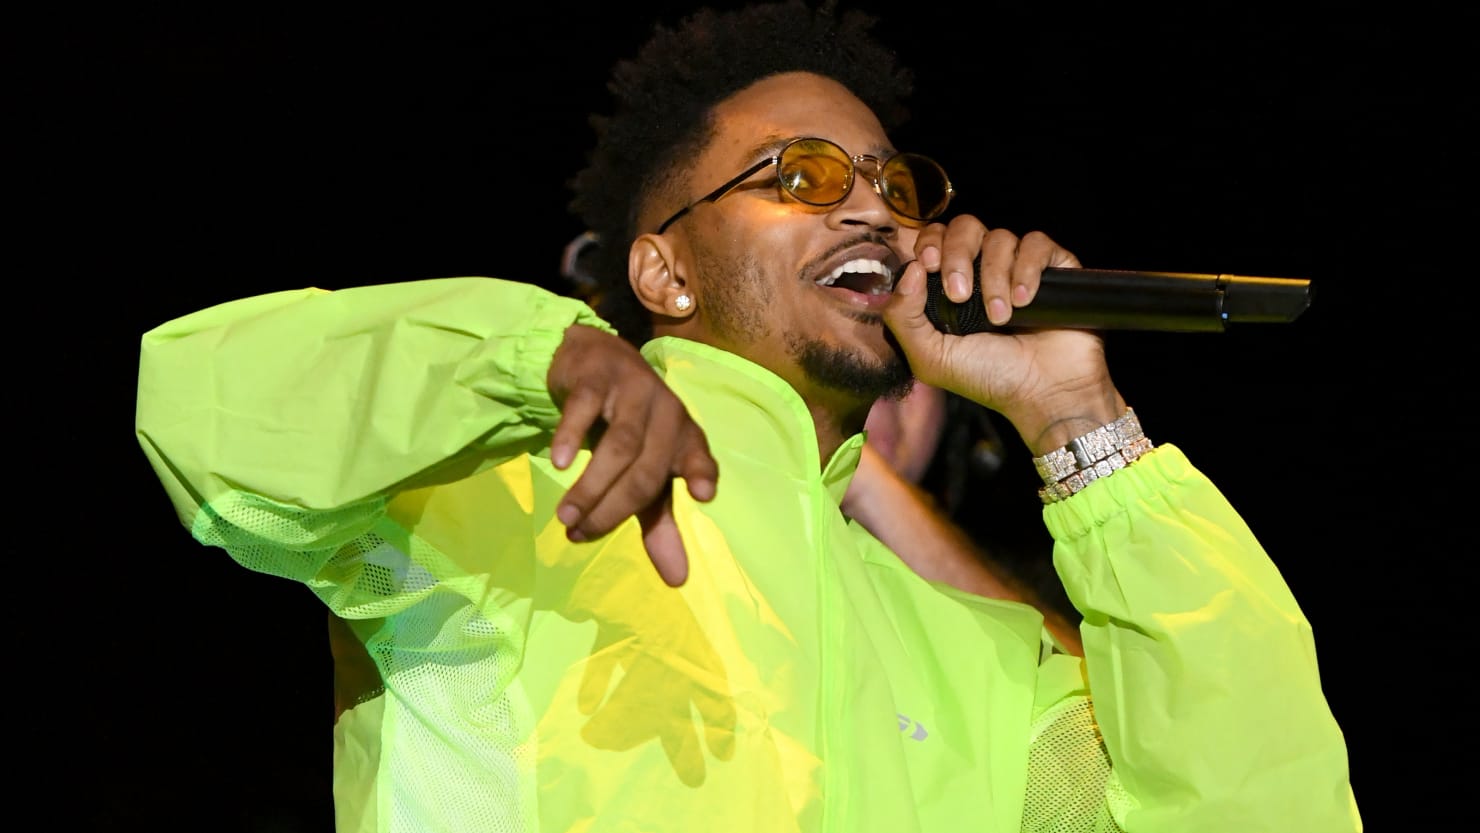 Third Woman Accuses Trey Songz of ‘Brutal’ Rape That Landed Her in Hospital